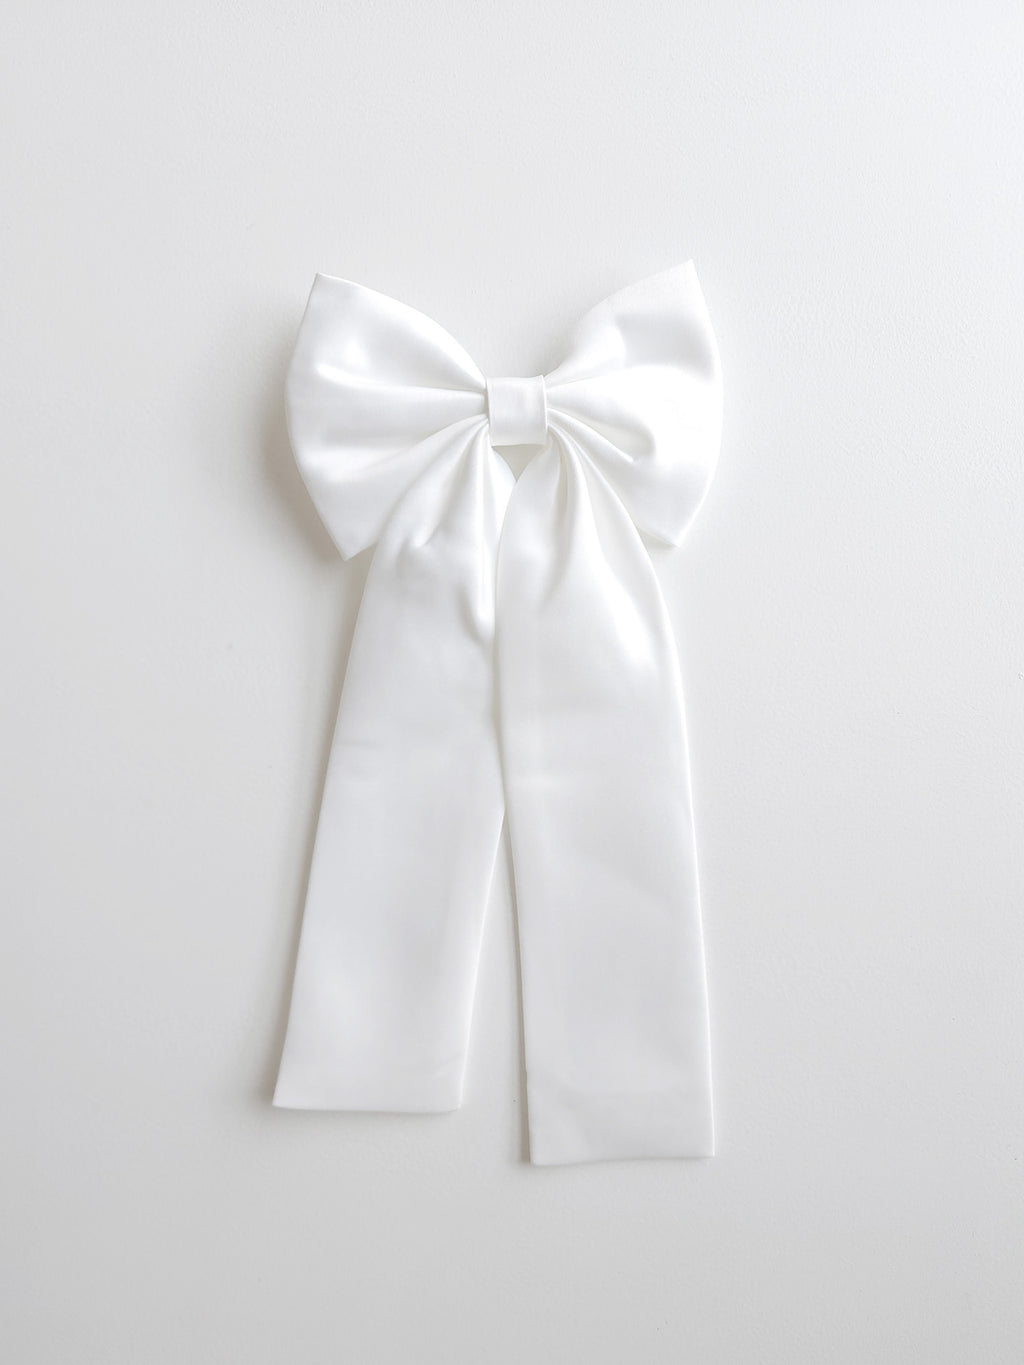 Adeline satin bow for flower girls. To match our Adeline satin flower girl dress.